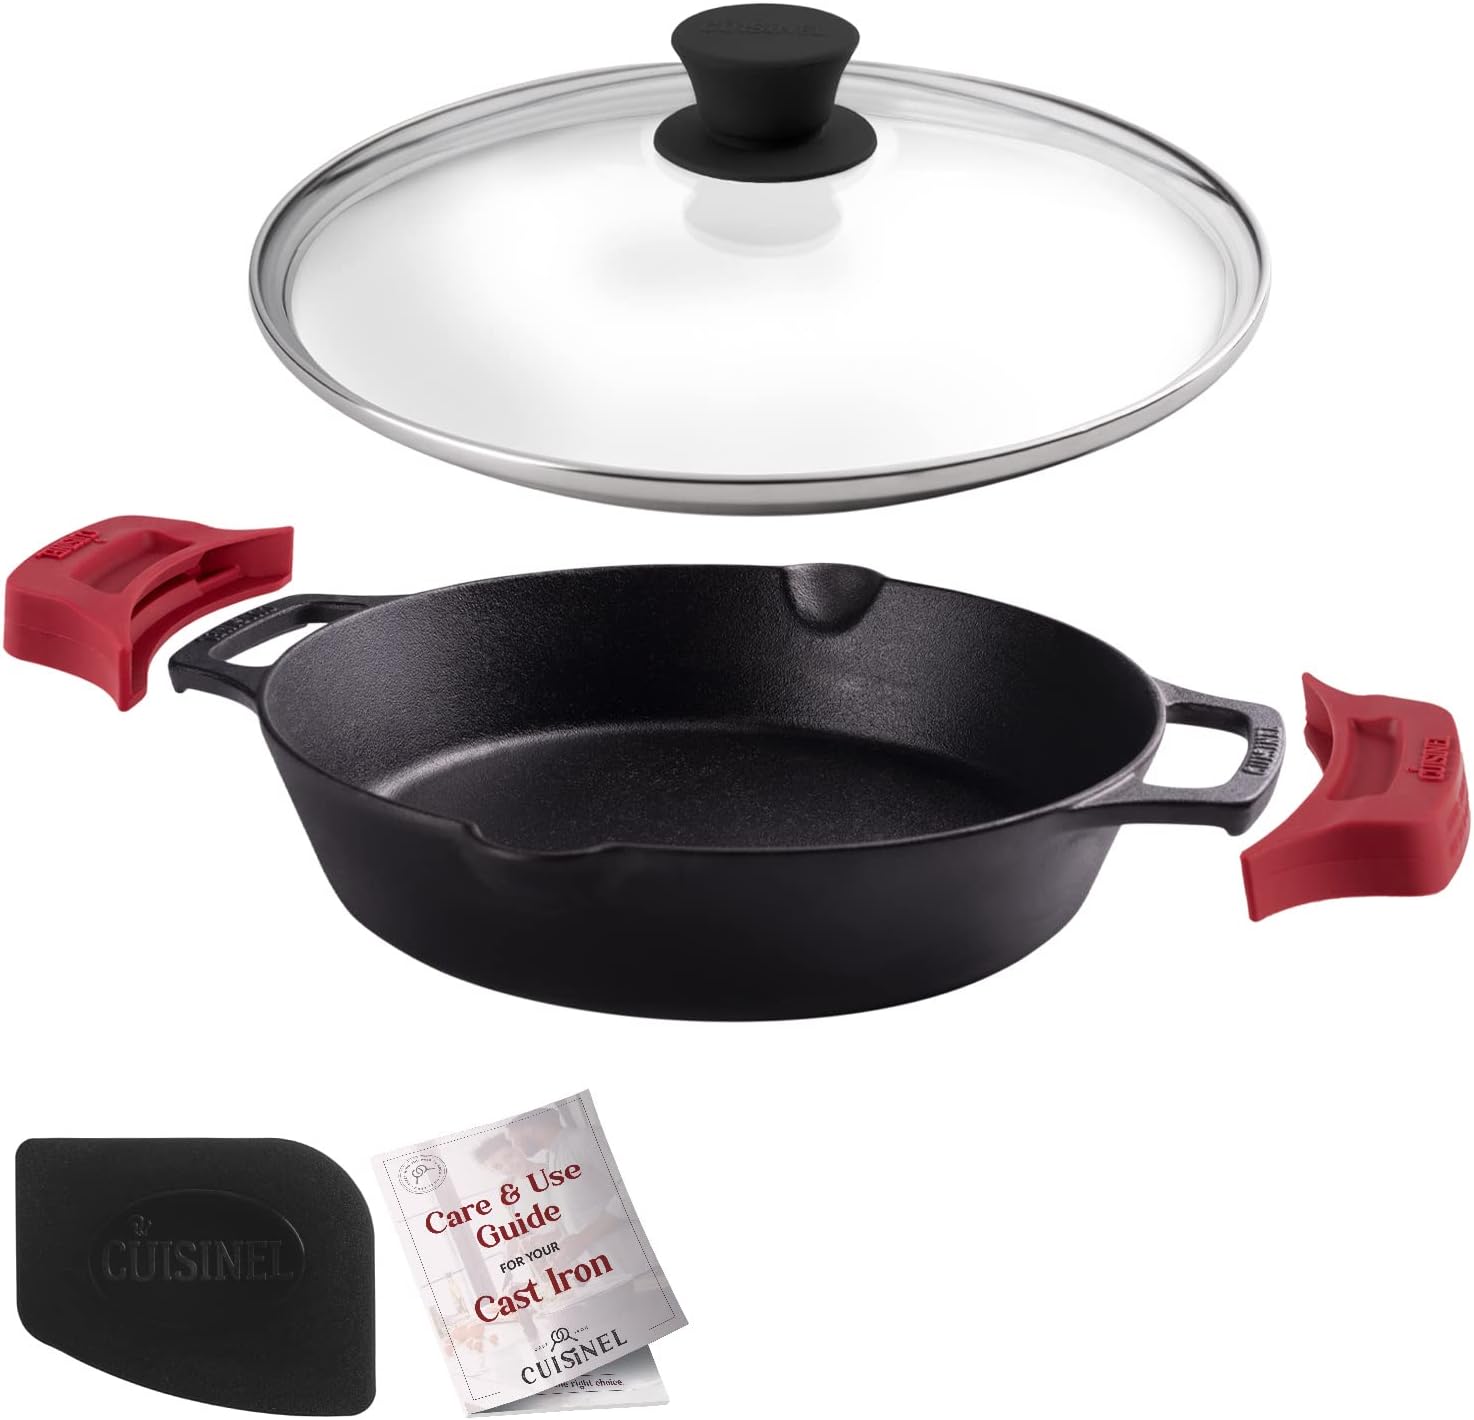 Cast Iron Skillet with Glass Lid - 10